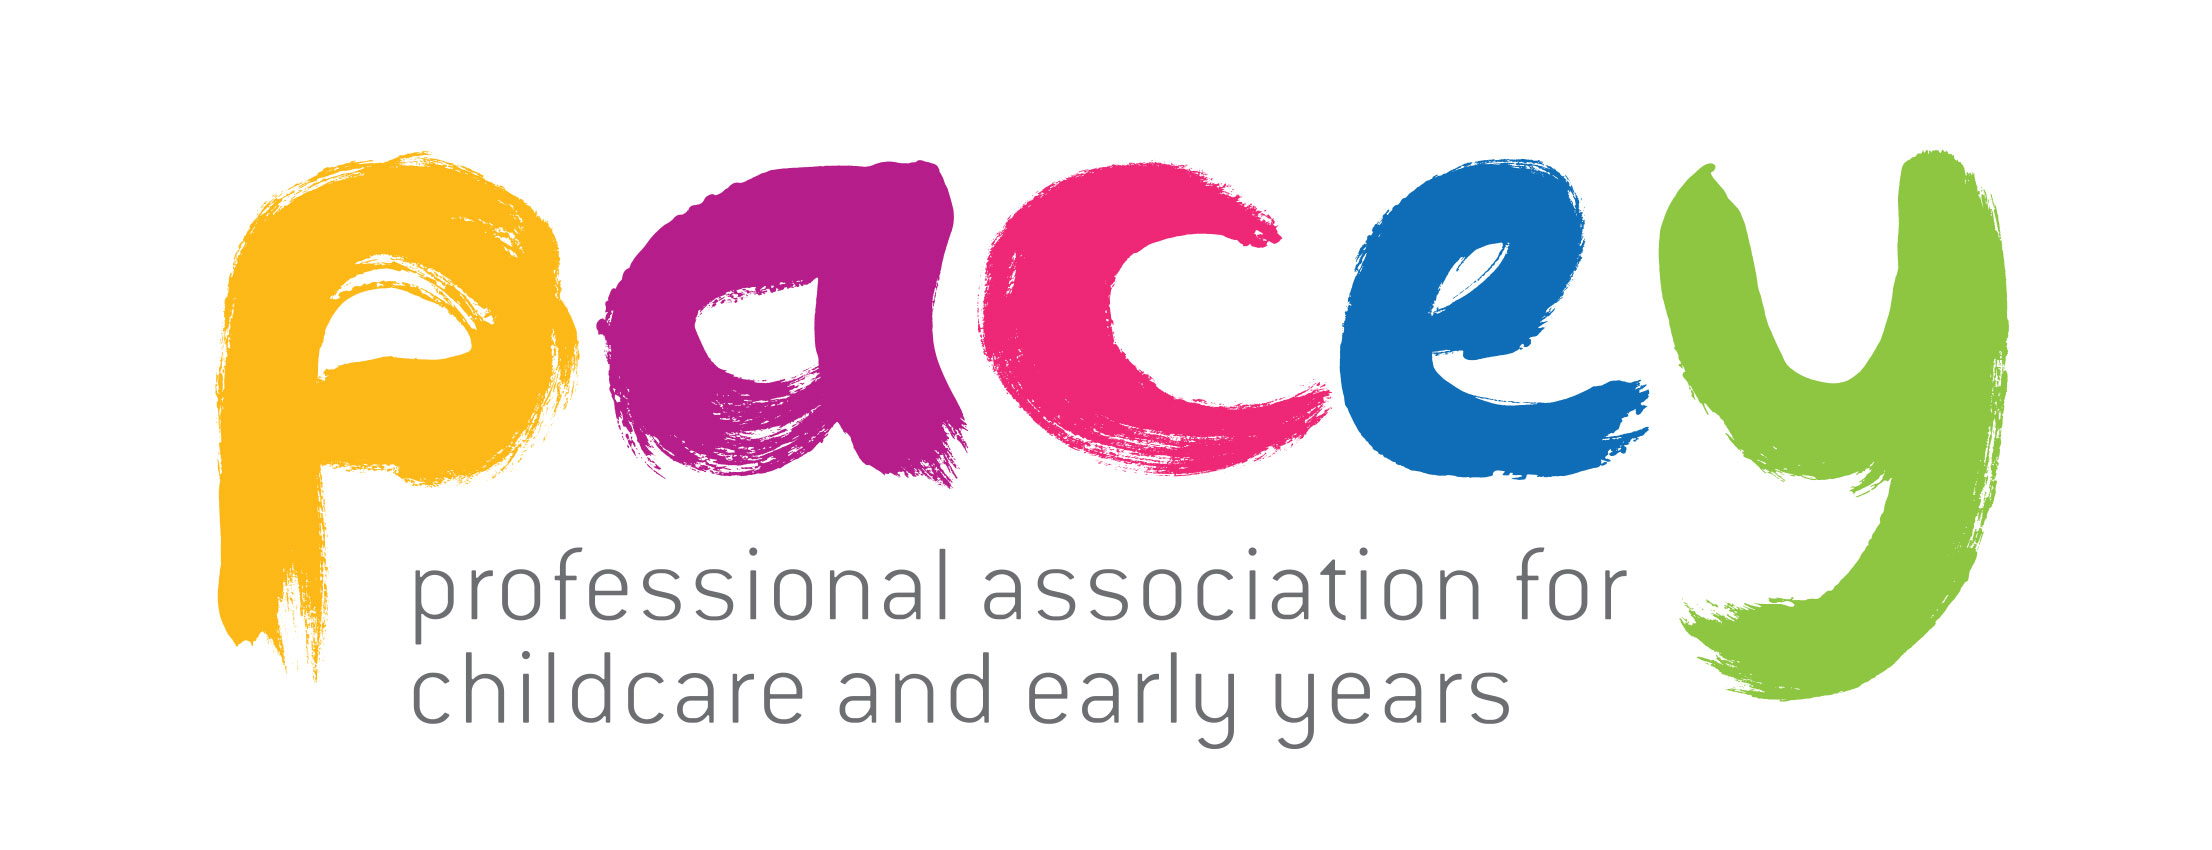 Professional Association for Childcare and Early Years.JPG